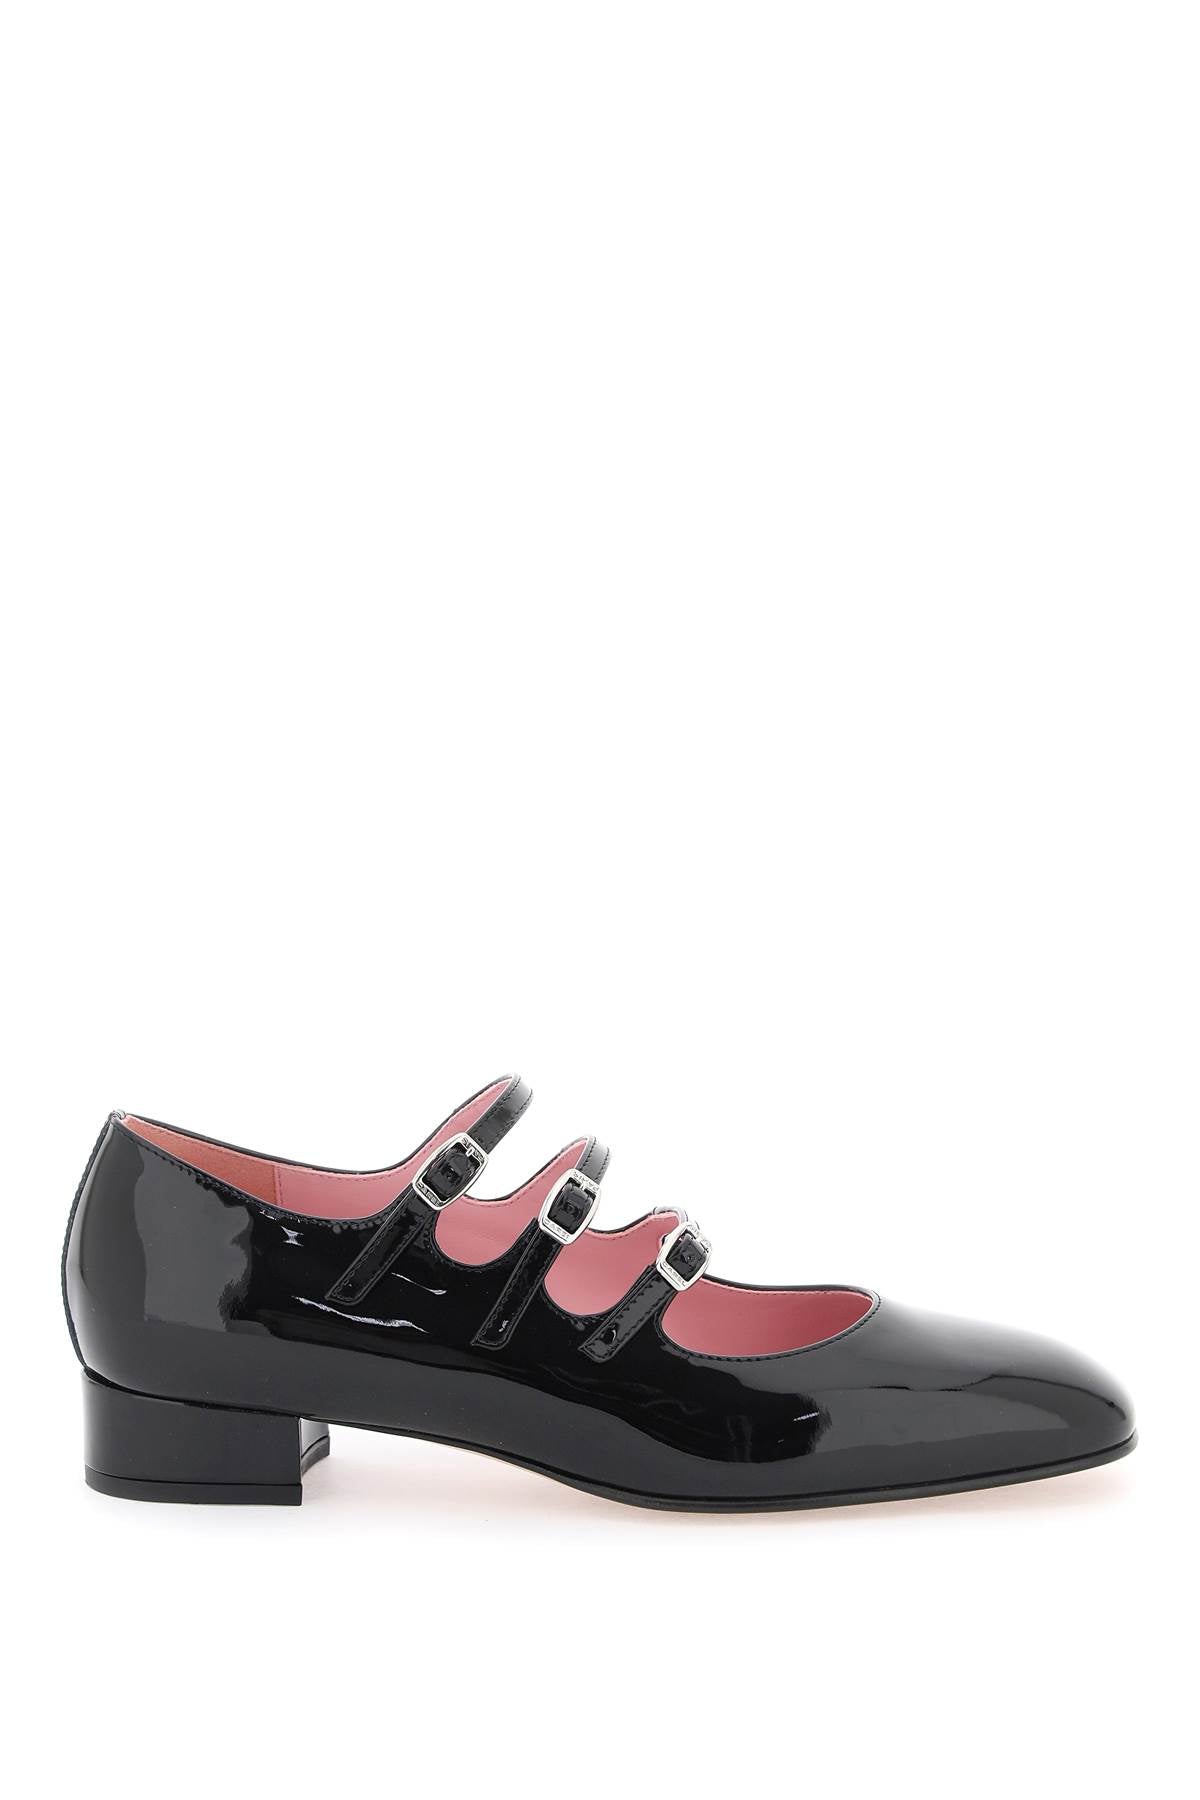 Carel patent leather ariana mary jane-0